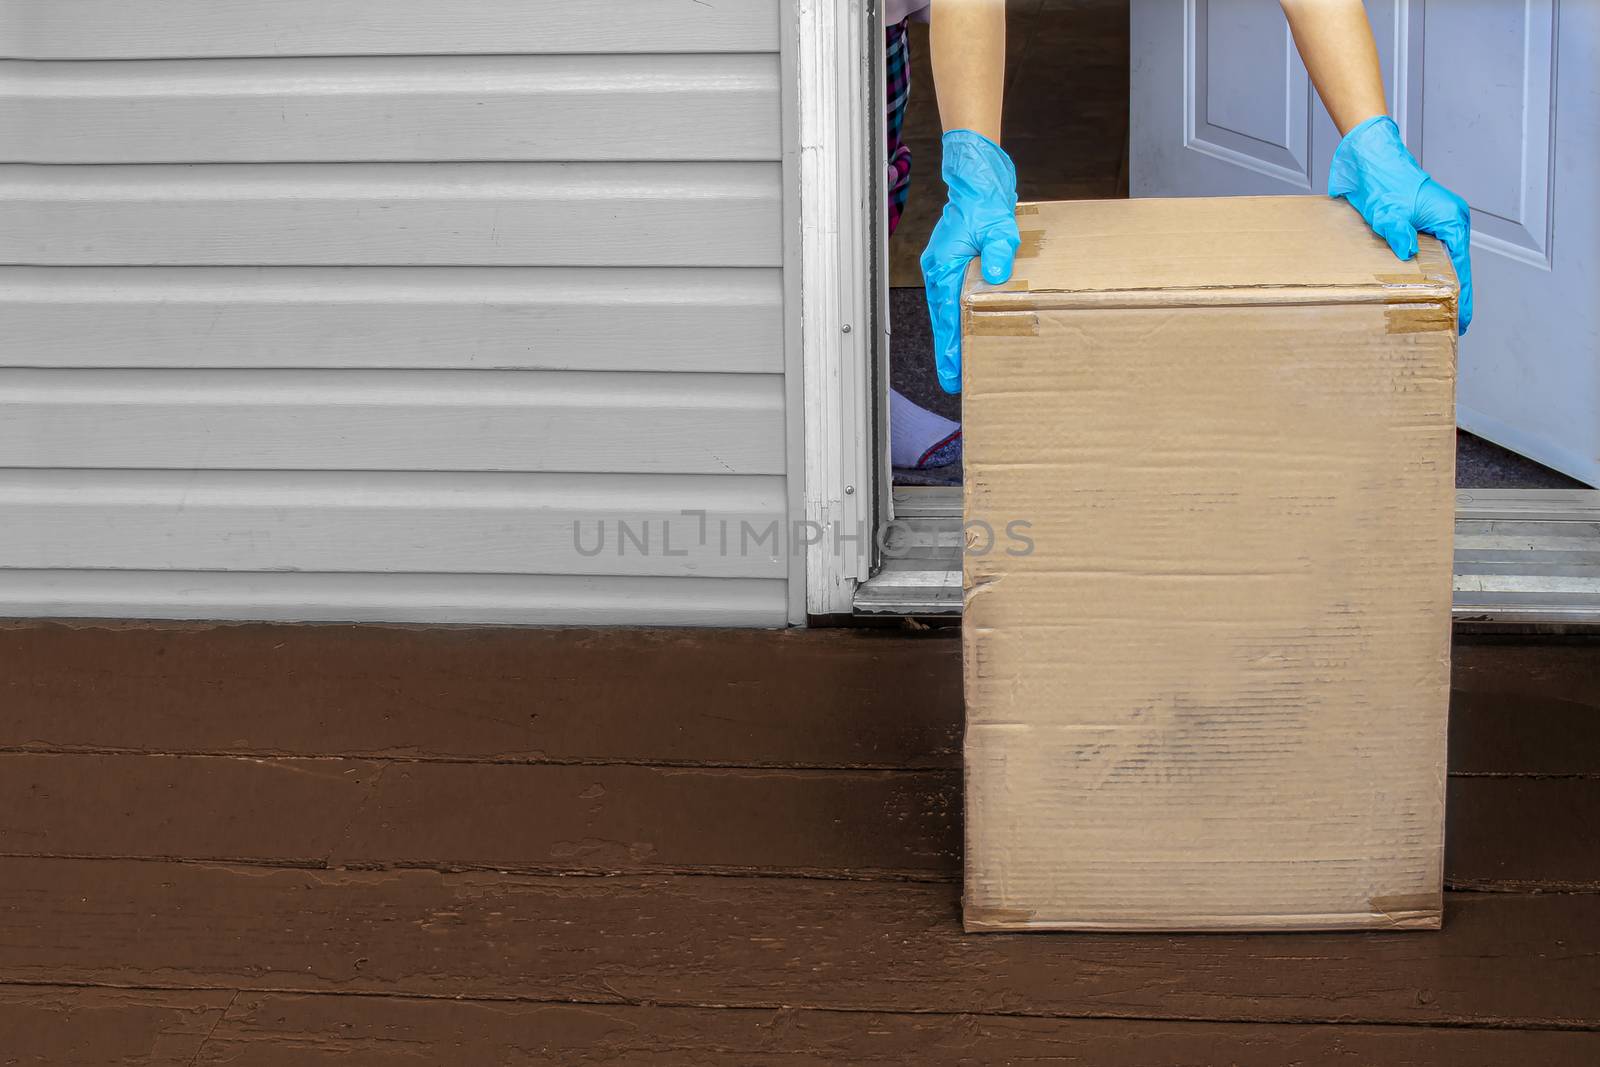 A person wearing gloves, picking up a deliver box from a home entrance by oasisamuel